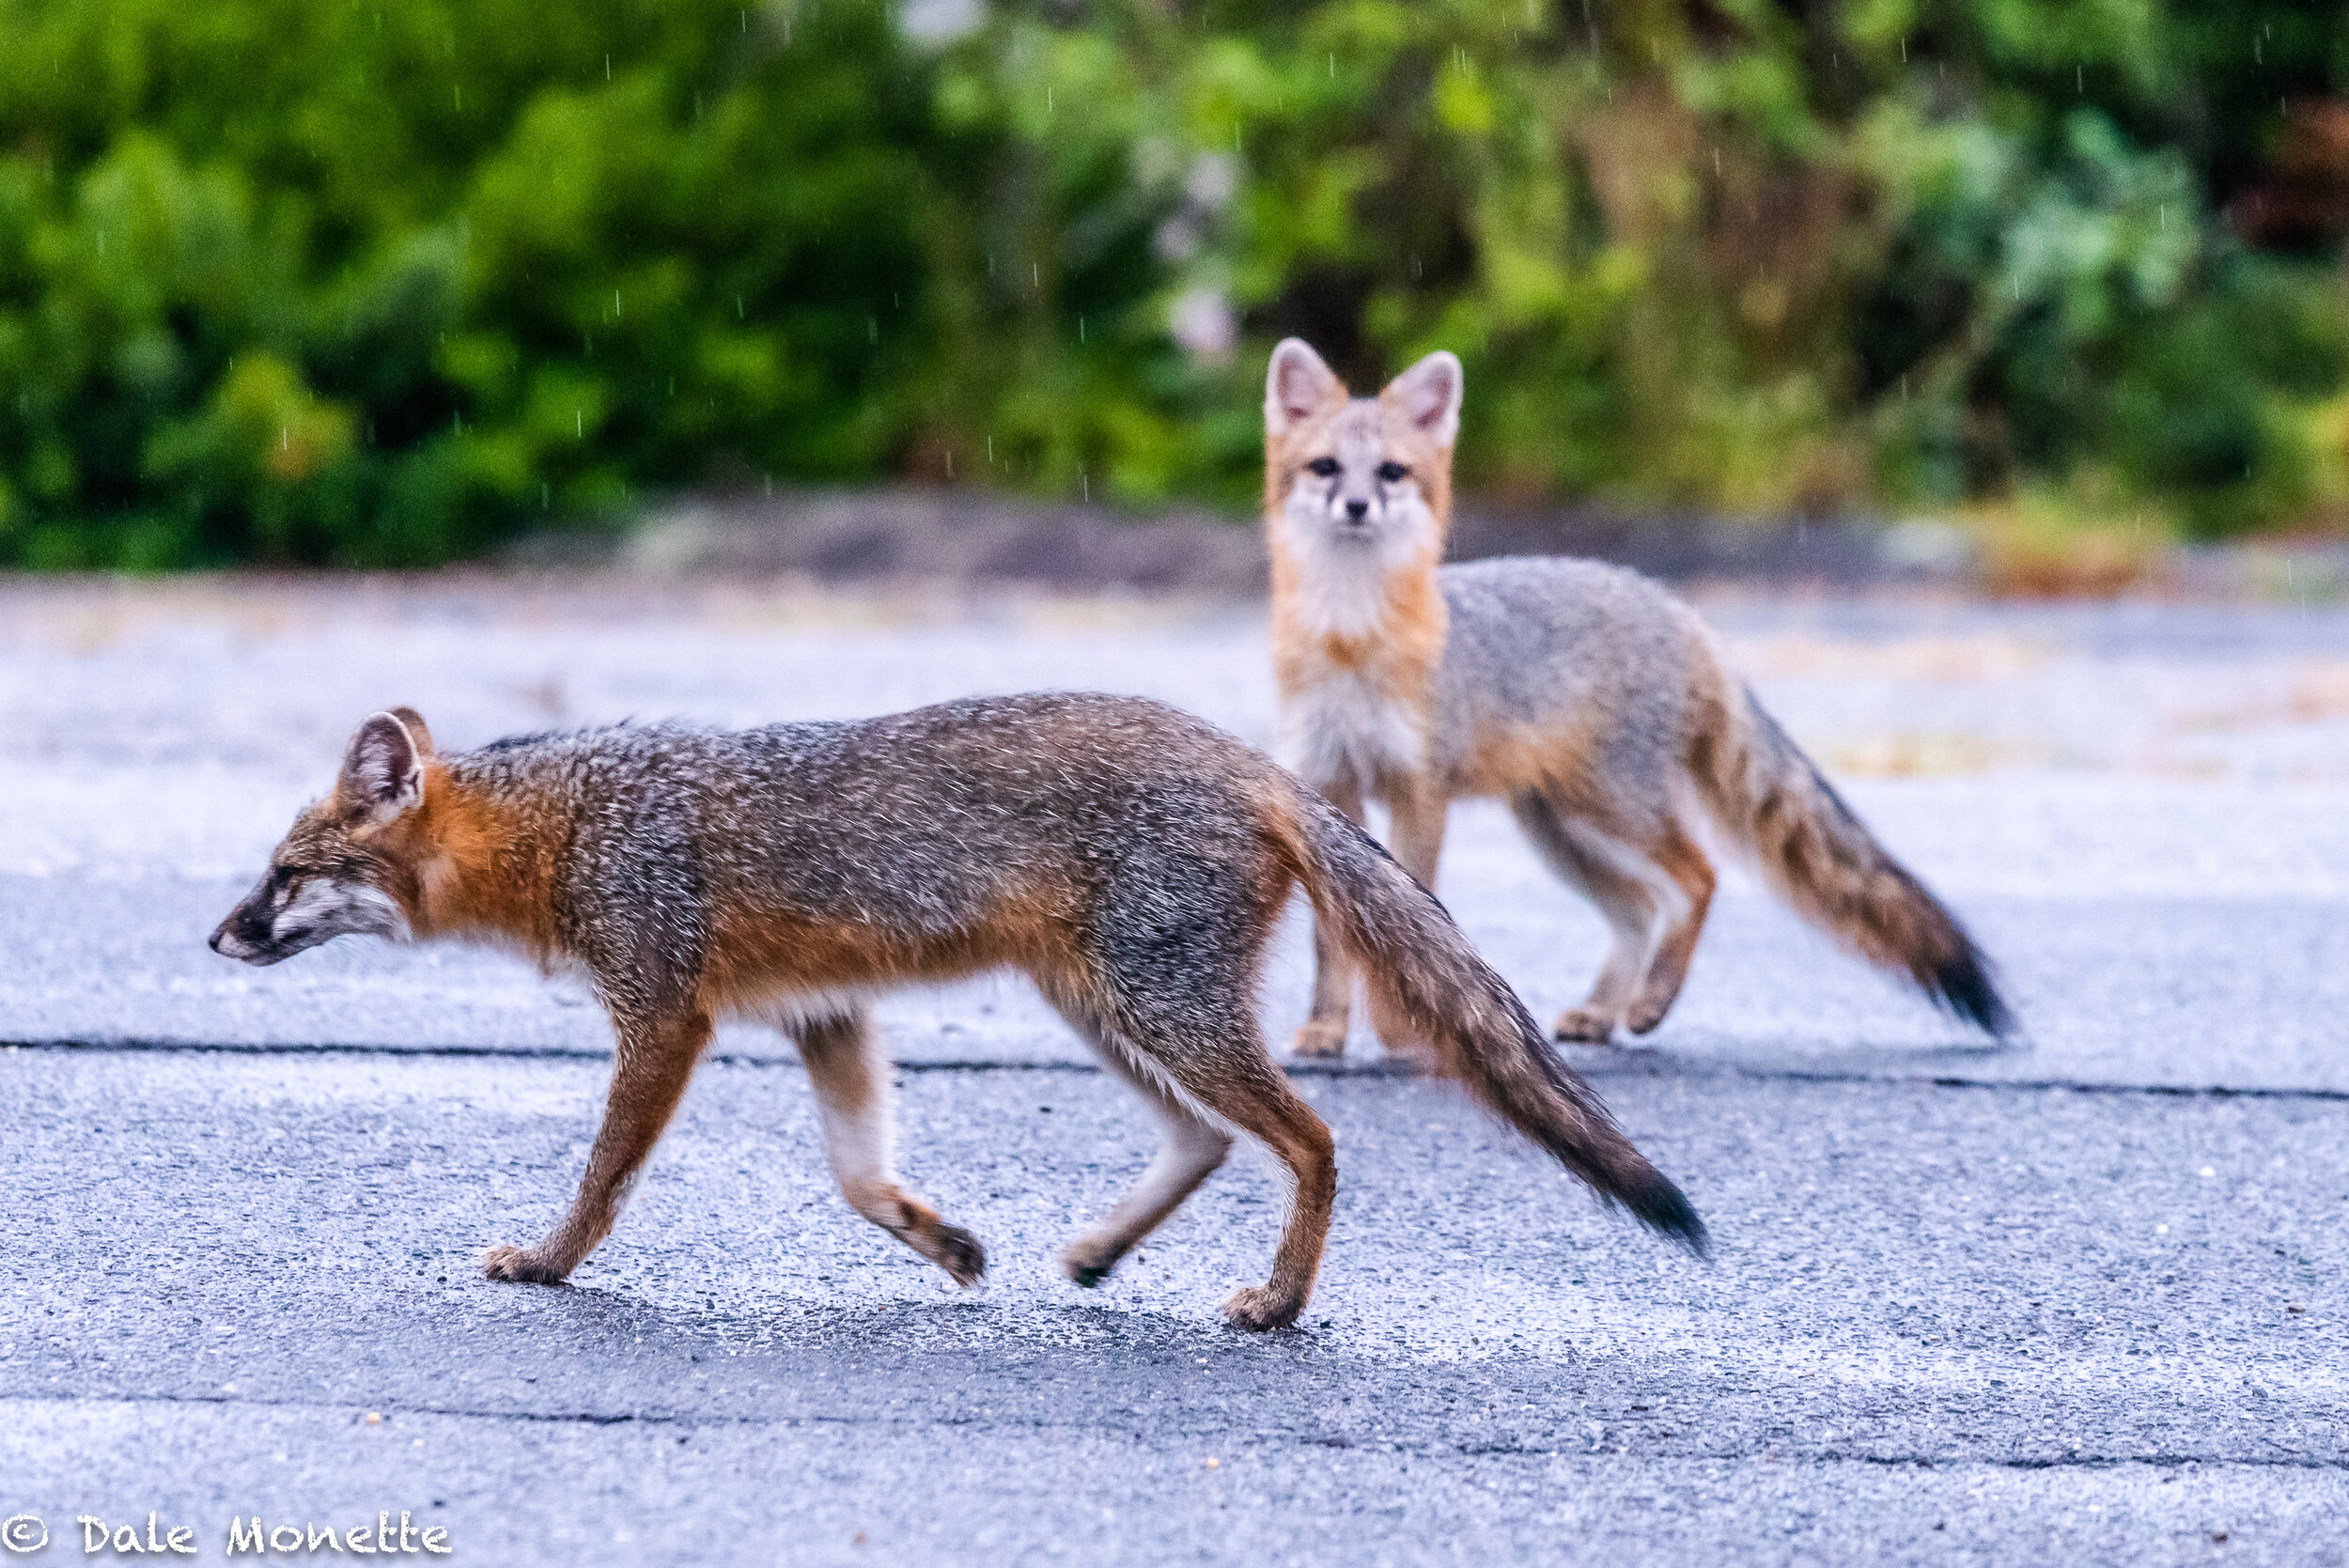   I ran into a pair of gray fox this morning running around a parking lot in Orange close to the Millers River in the pouring rain.. This seems to be an adult with a young one tagging along.  I love these guys and usually see them running across the 